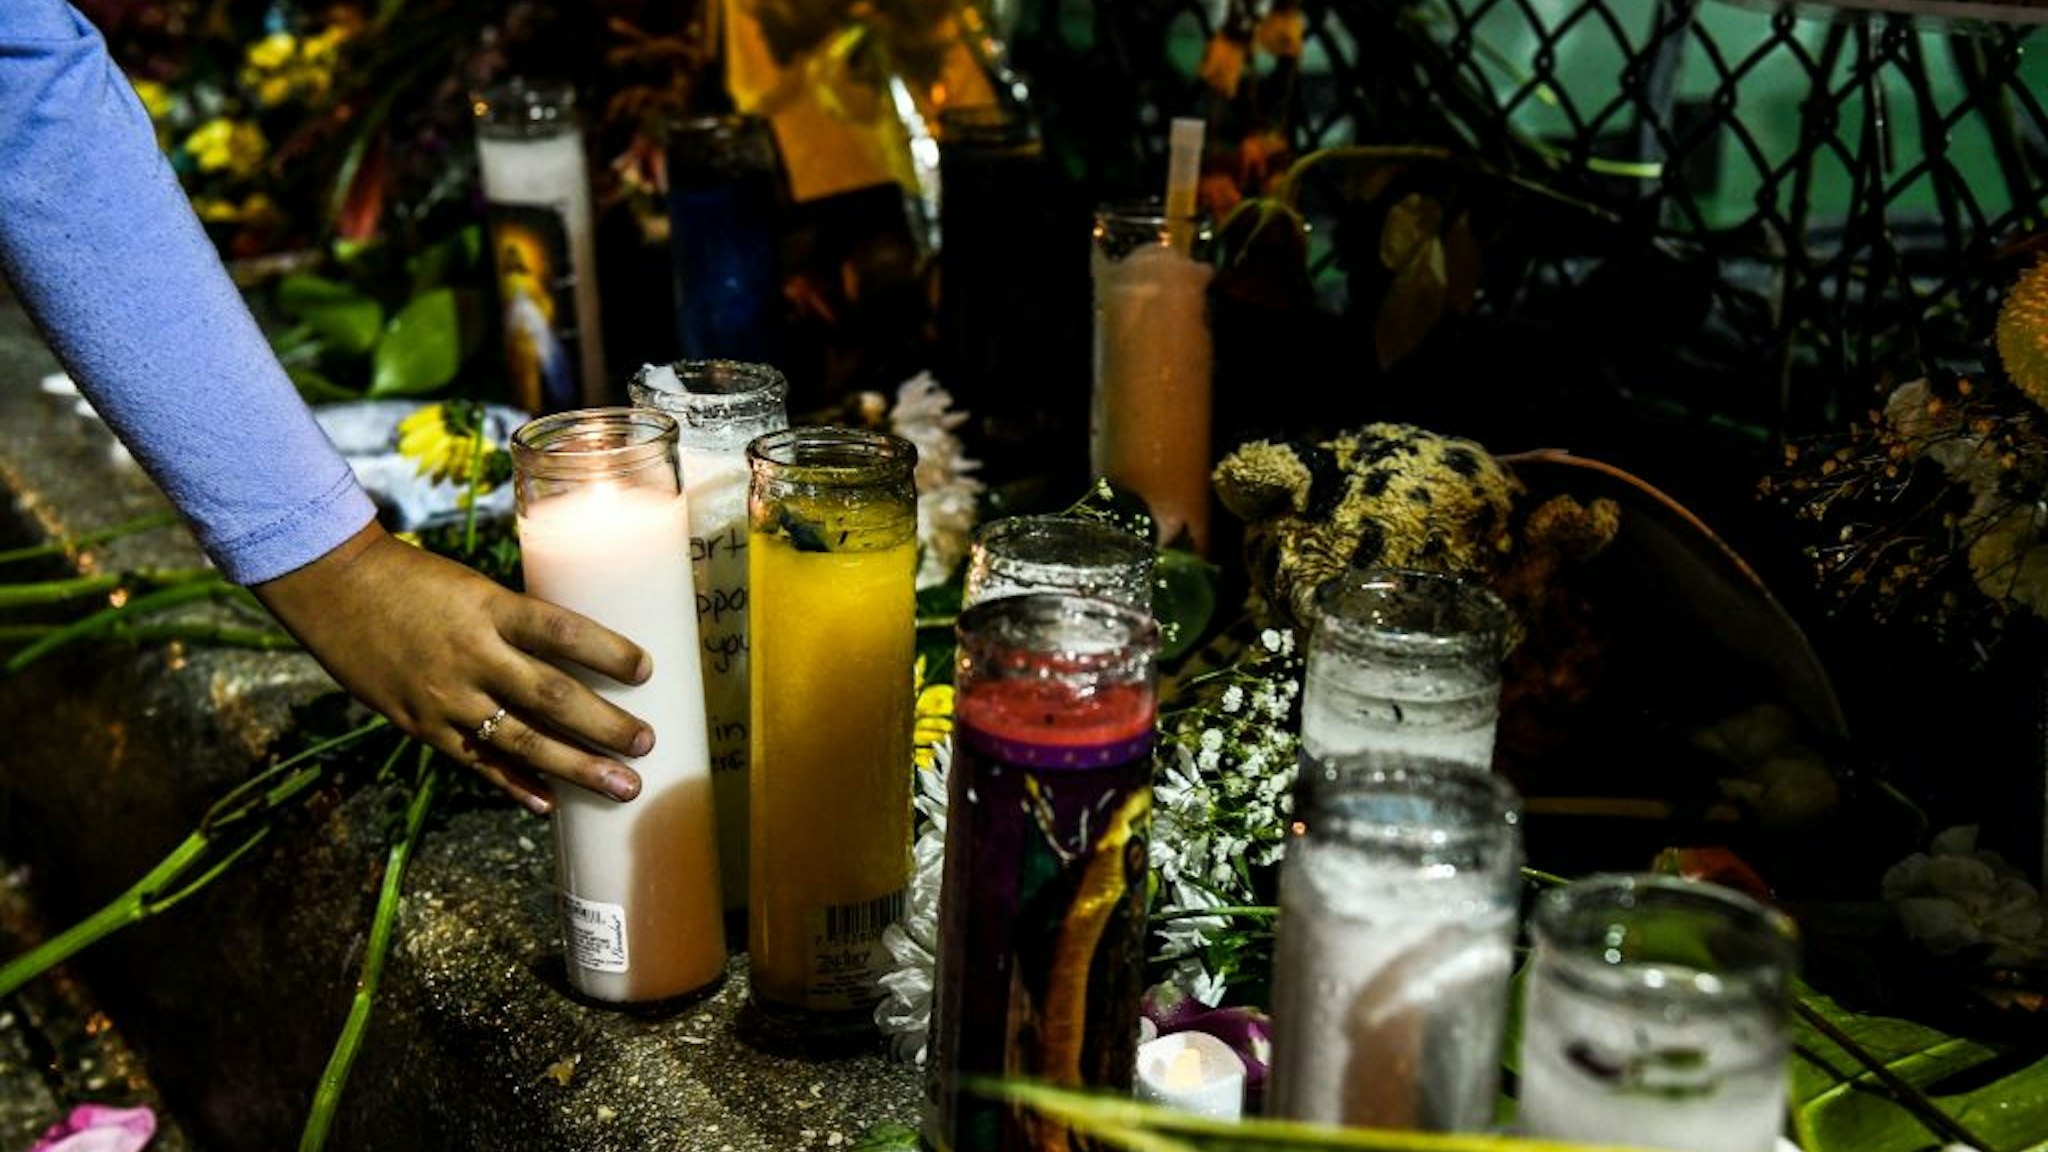 Salome Piedrahita lights a candle at the makeshift memorial for the victims of the building collapse, near the site of the accident in Surfside, Florida, north of Miami Beach on June 30, 2021. - Four more bodies were discovered overnight in the rubble of a collapsed apartment building in Florida, authorities said Wednesday, as the search for more than 140 people unaccounted for entered its seventh day. The official death toll now stands at 16 after most of a building in the Miami-area town of Surfside suddenly pancaked early last Thursday, but hopes are dwindling that the hundreds of rescuers combing the oceanfront site will find anyone alive.